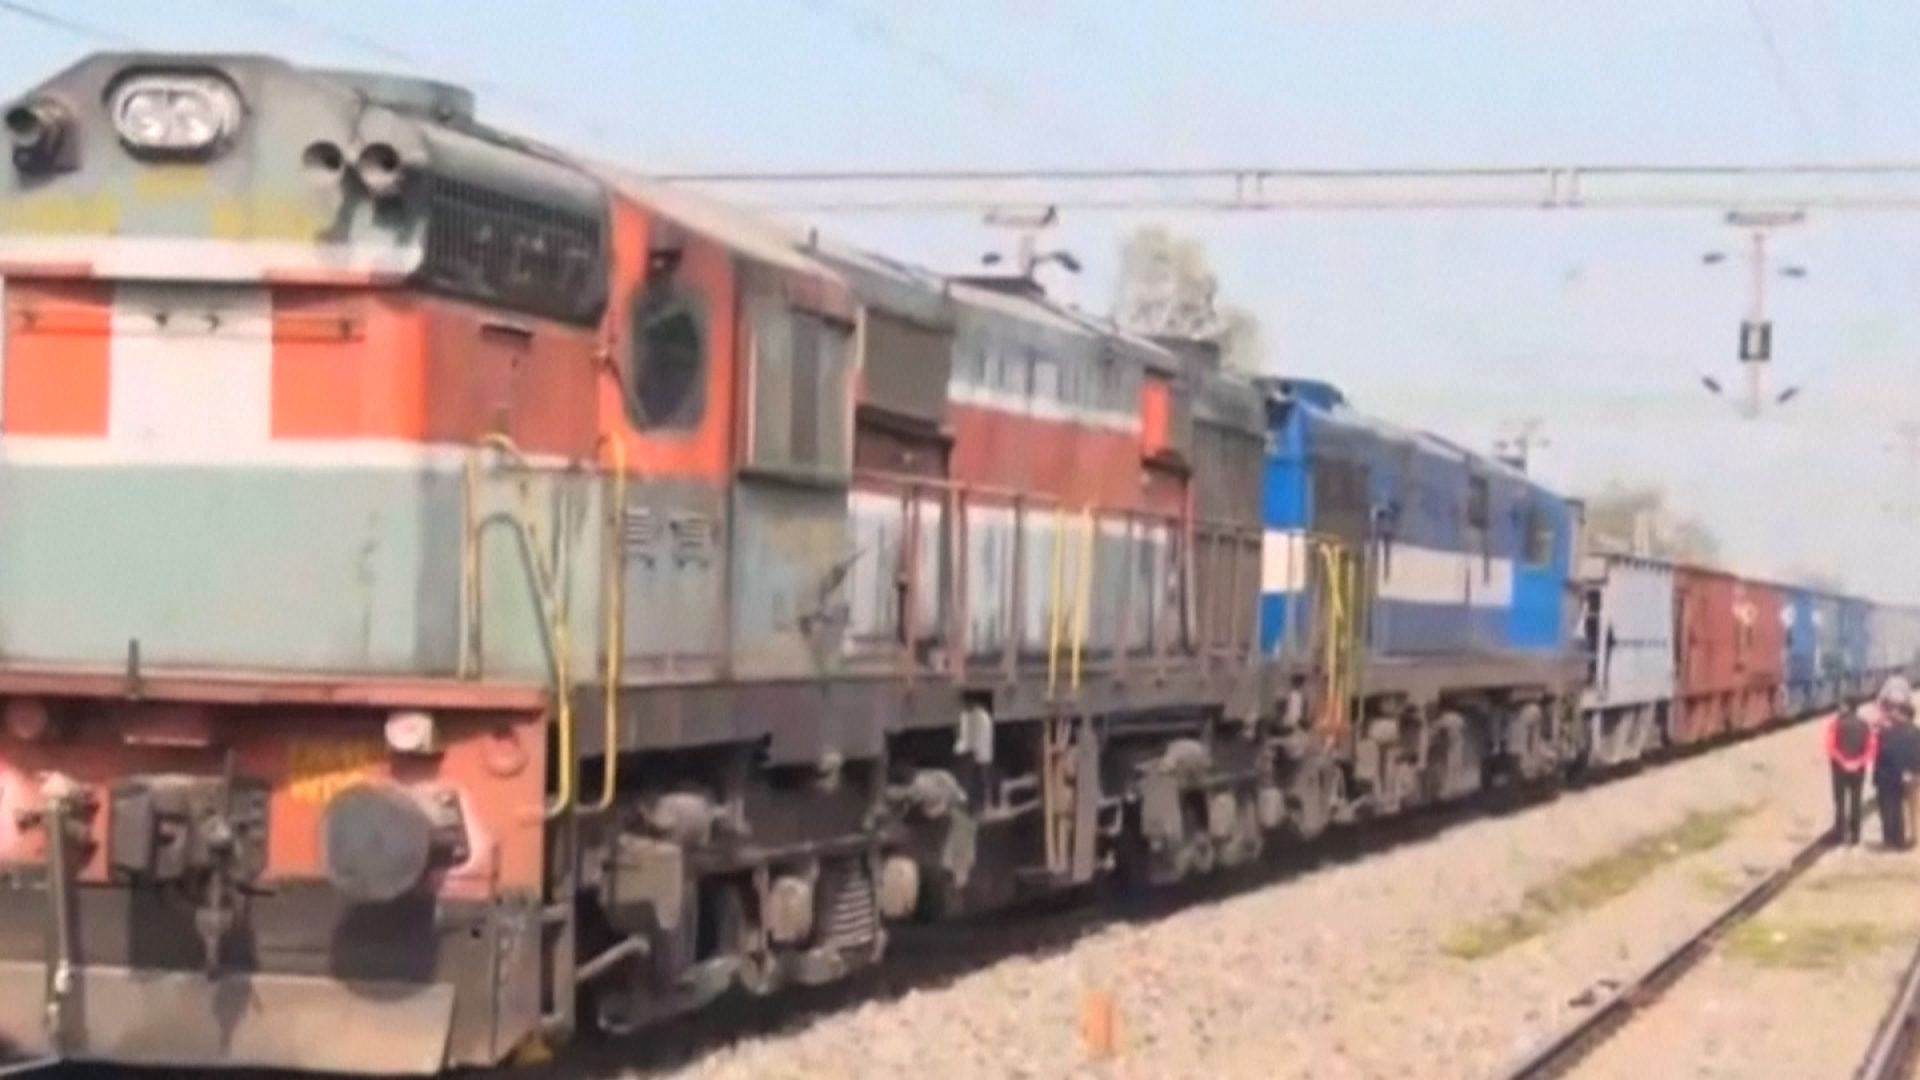 Runaway train in India travels more than 40 miles without driver - Accidents and Disasters - News